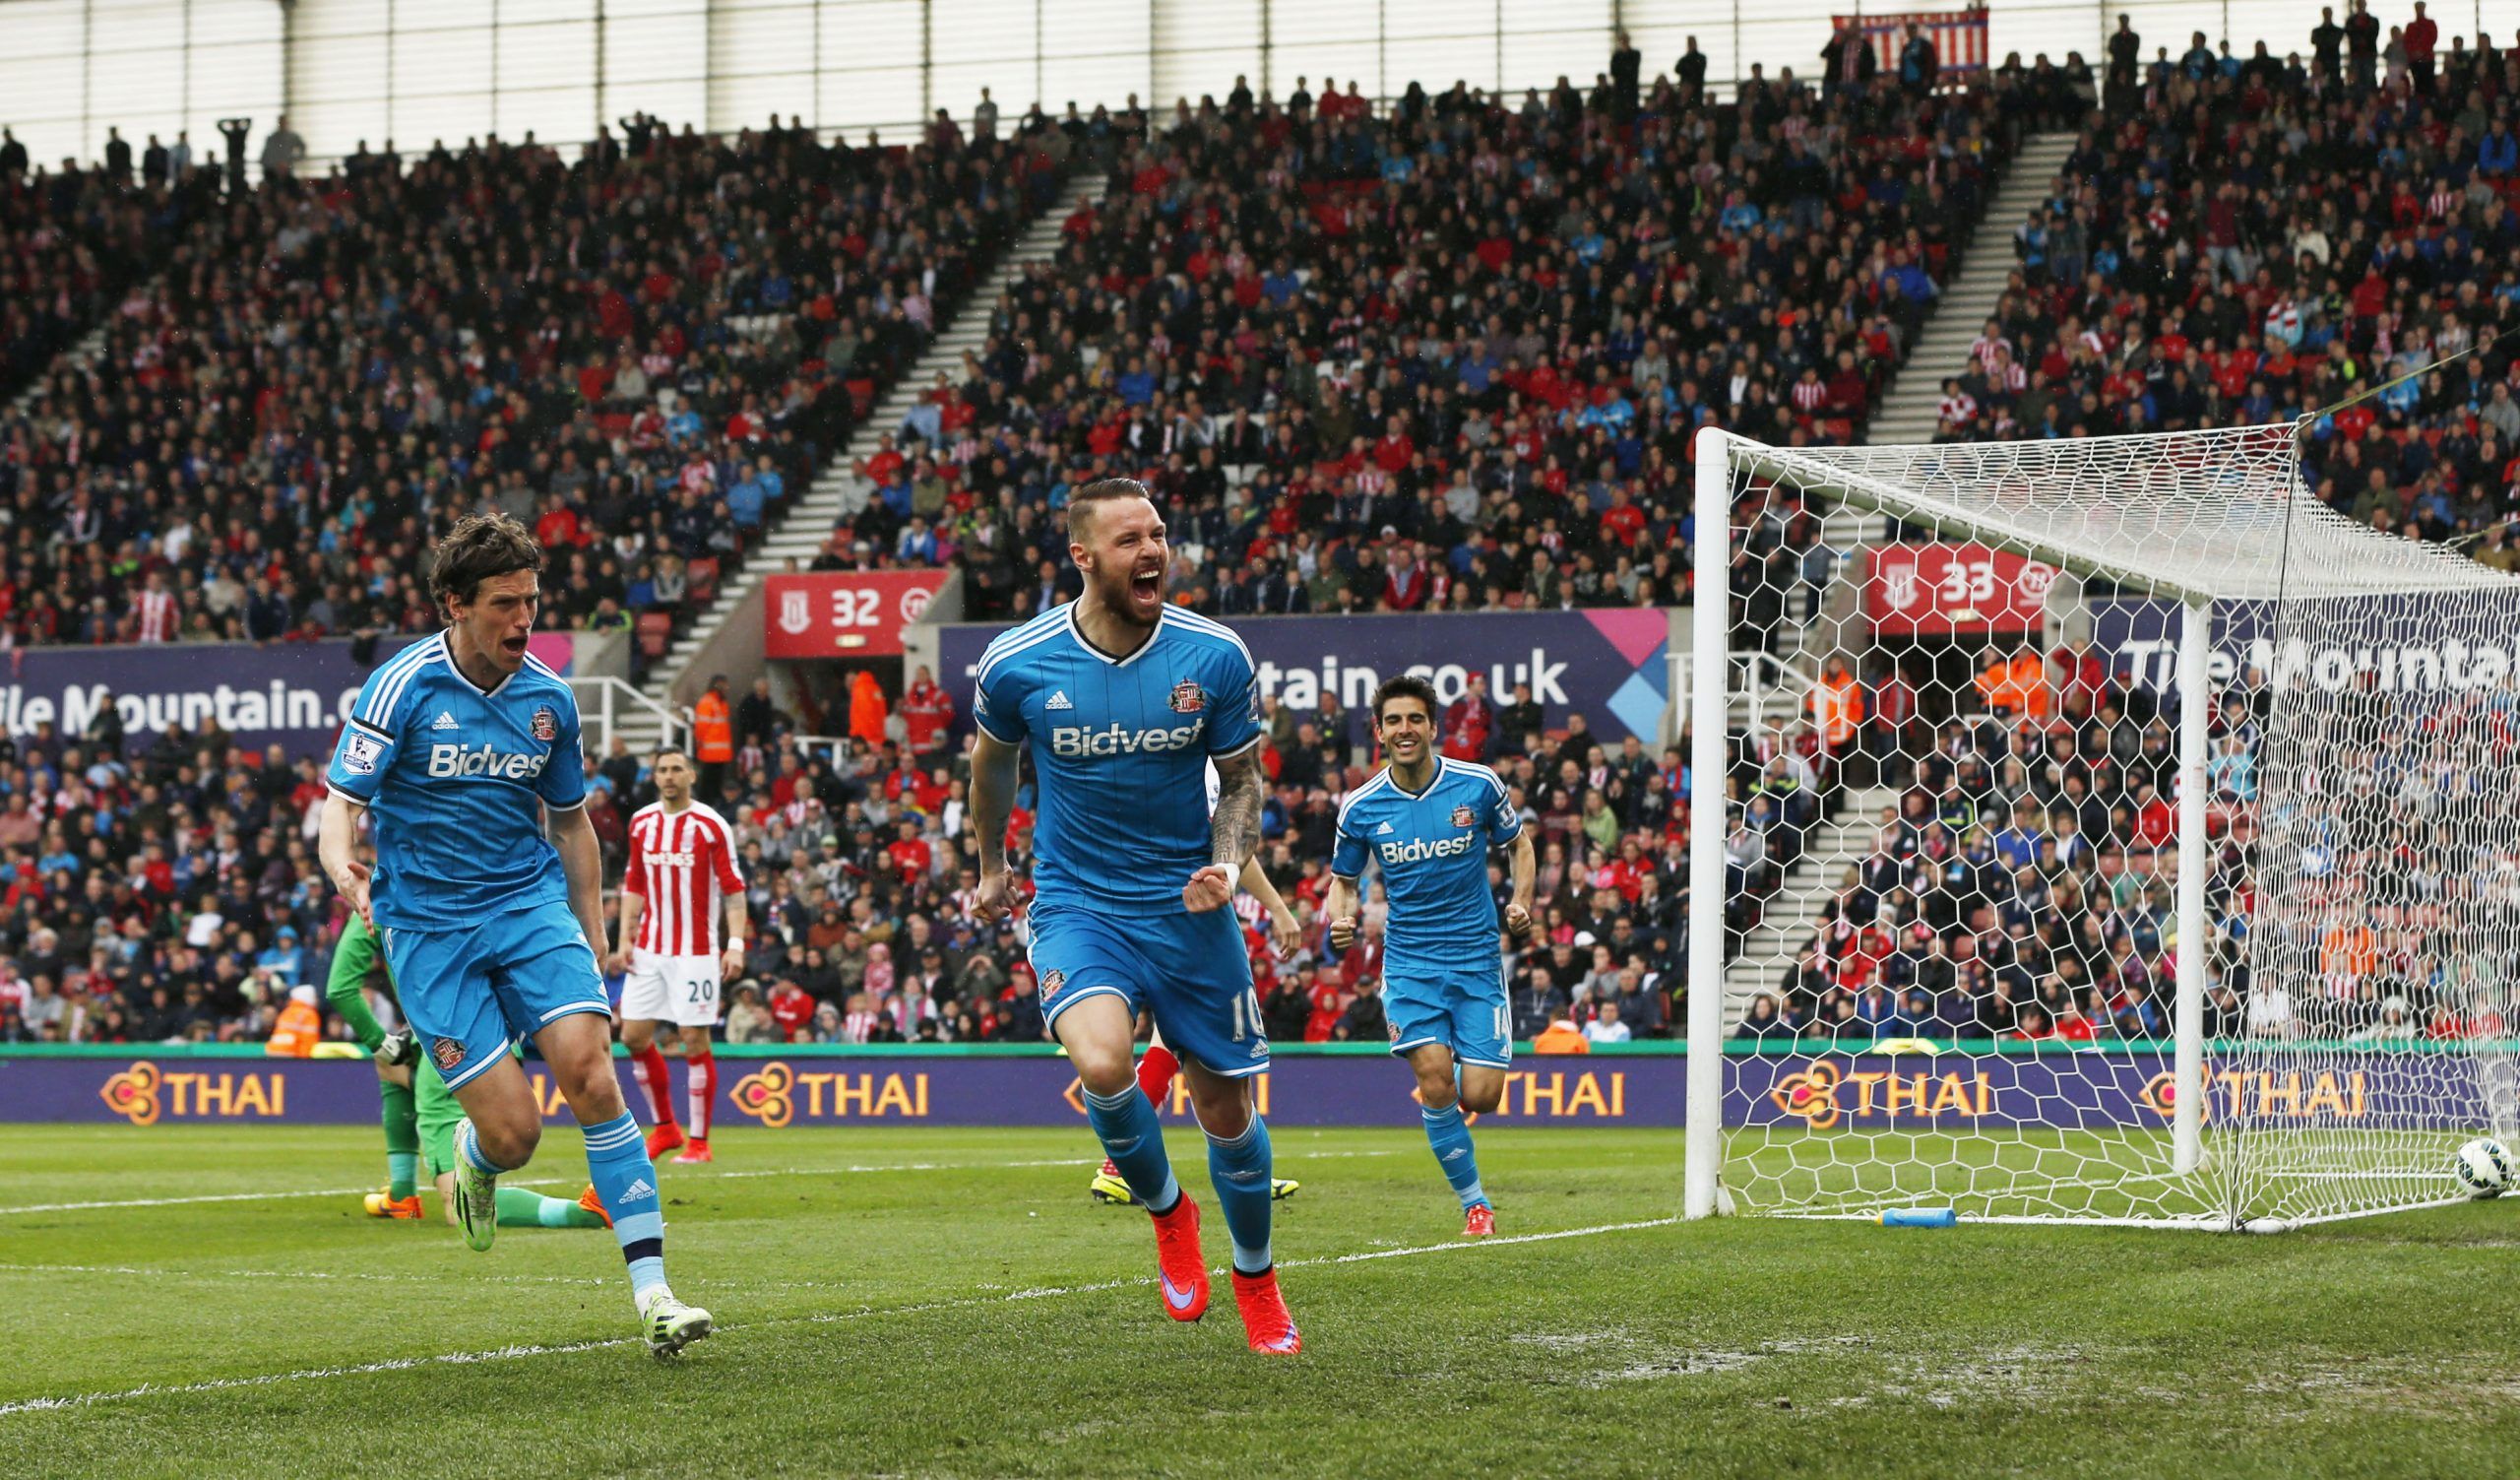 Football - Stoke City v Sunderland - Barclays Premier League - Britannia Stadium - 25/4/15 
Connor Wickham celebrates scoring the first goal for Sunderland 
Mandatory Credit: Action Images / Andrew Boyers 
Livepic 
EDITORIAL USE ONLY. No use with unauthorized audio, video, data, fixture lists, club/league logos or 